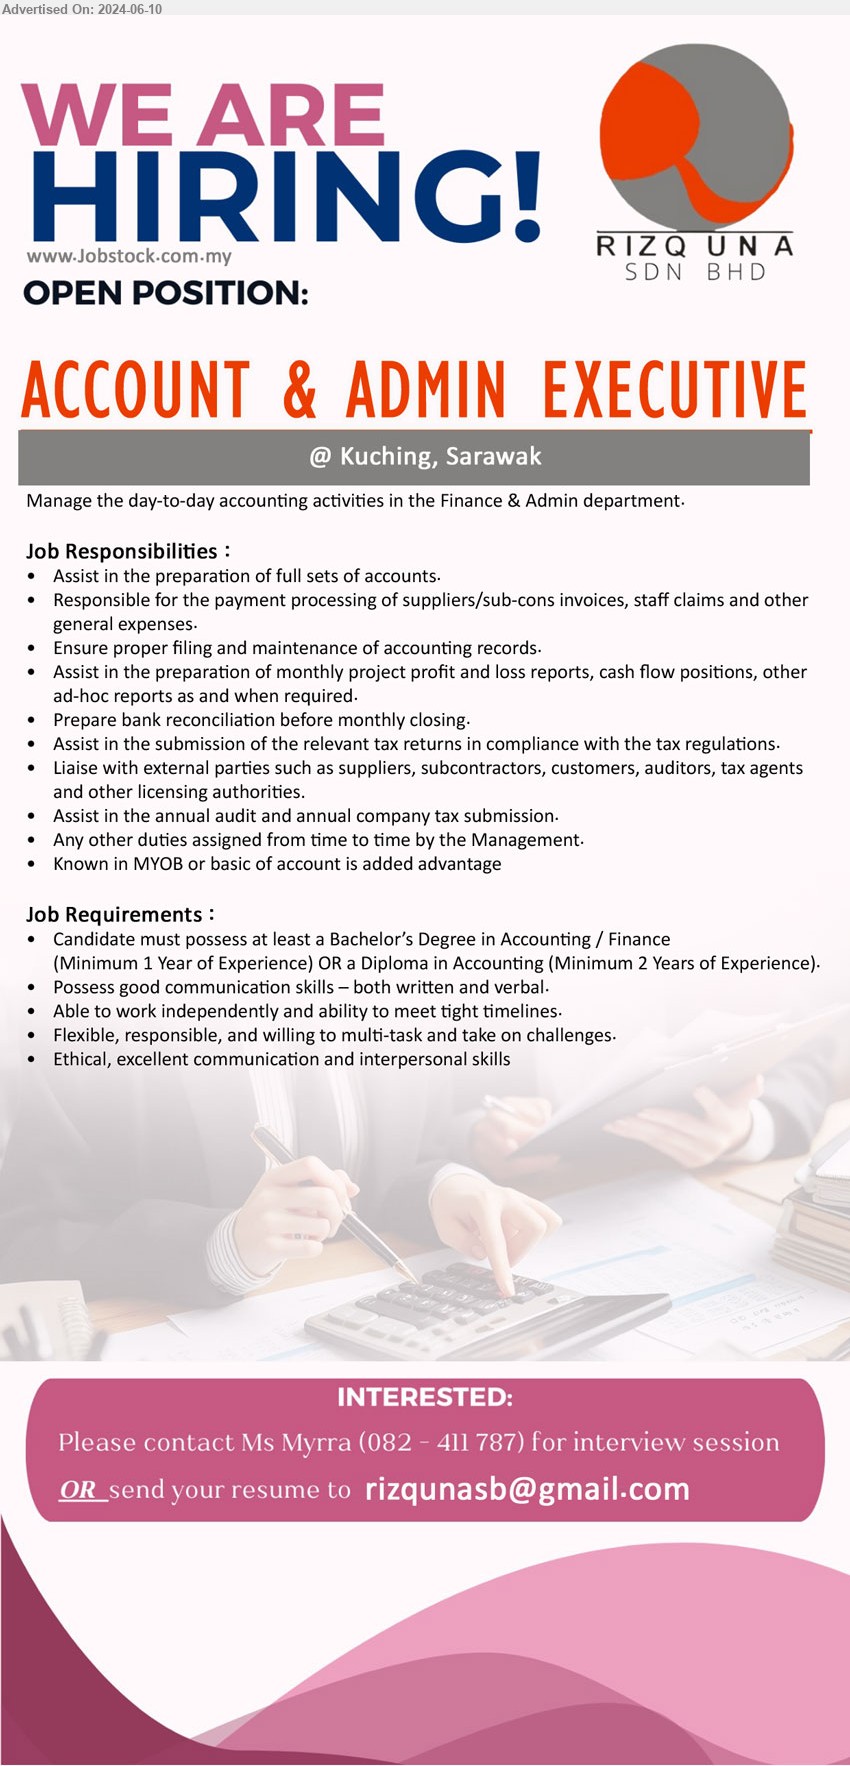 RIZQUNA SDN BHD - ACCOUNT & ADMIN EXECUTIVE (Kuching),  Bachelor’s Degree in Accounting / Finance, (Minimum 1 Year of Experience) OR a Diploma in Accounting (Minimum 2 Years of Experience).,...
Call 082-411787 / Email resume to ...